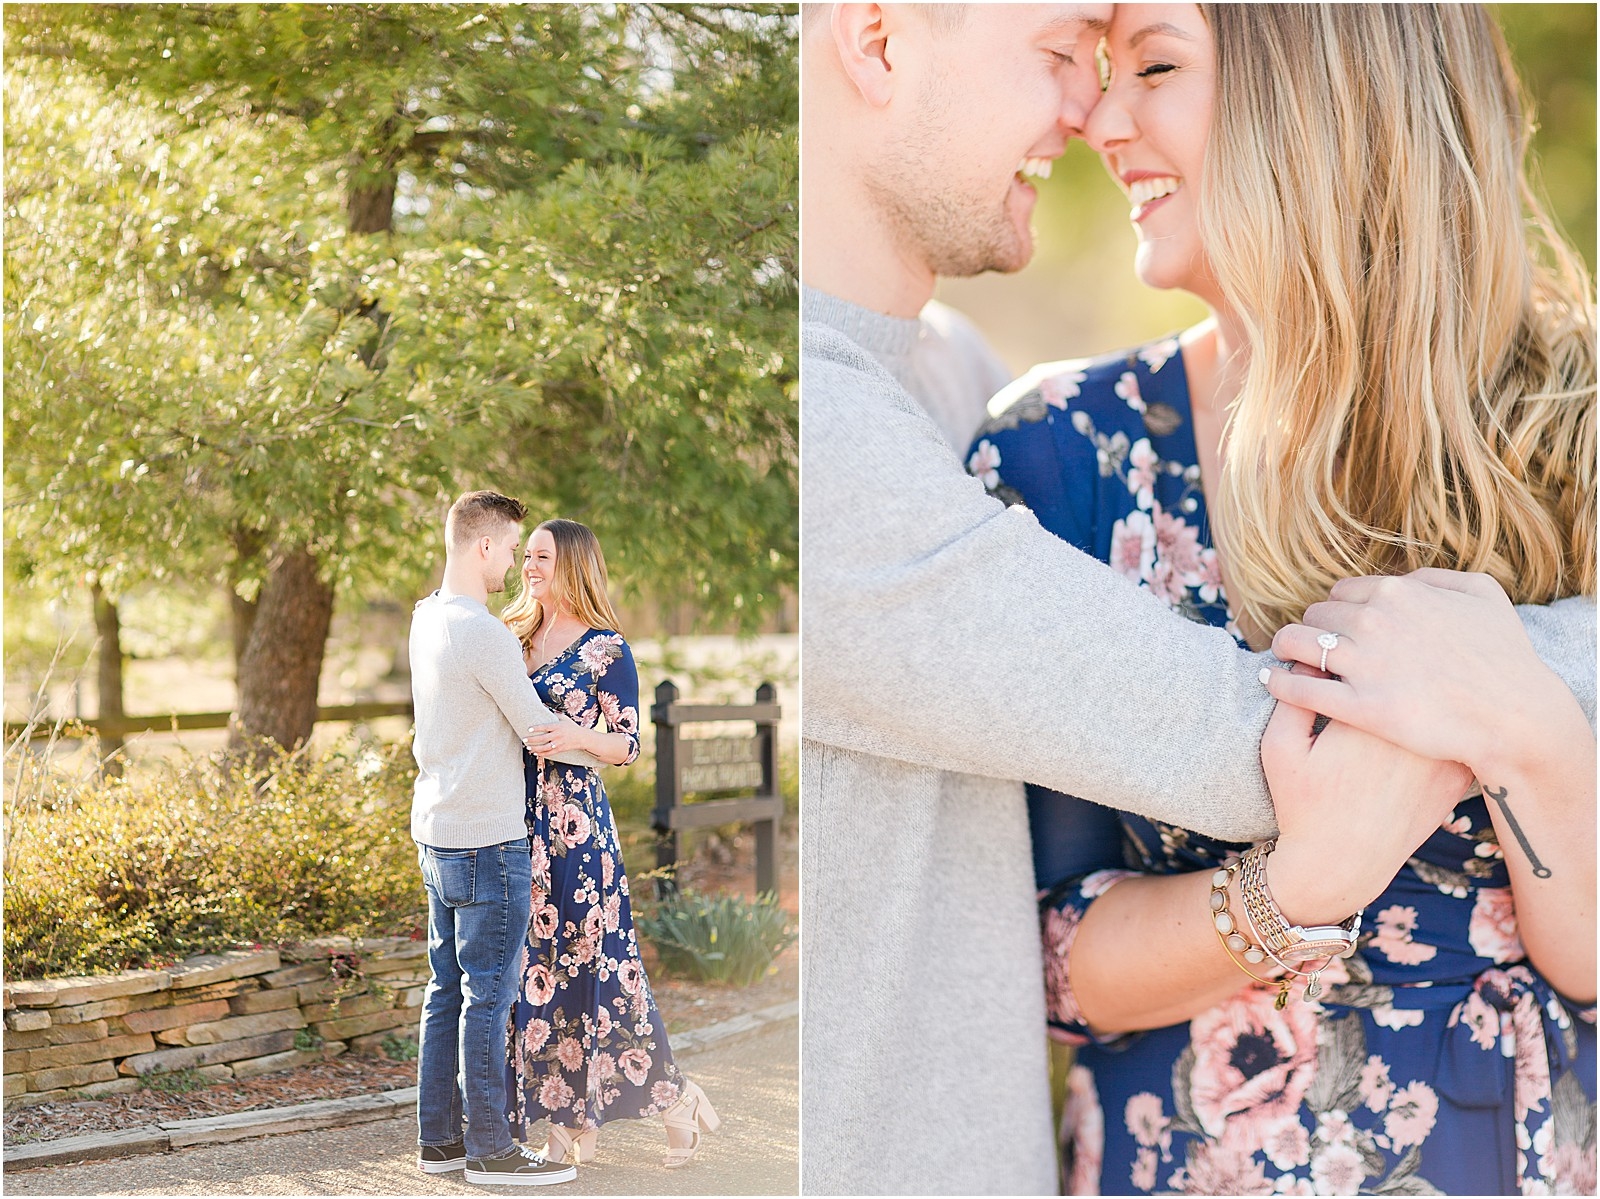 Rachel and Nick | Lincoln State Park Engagement Session 001.jpg